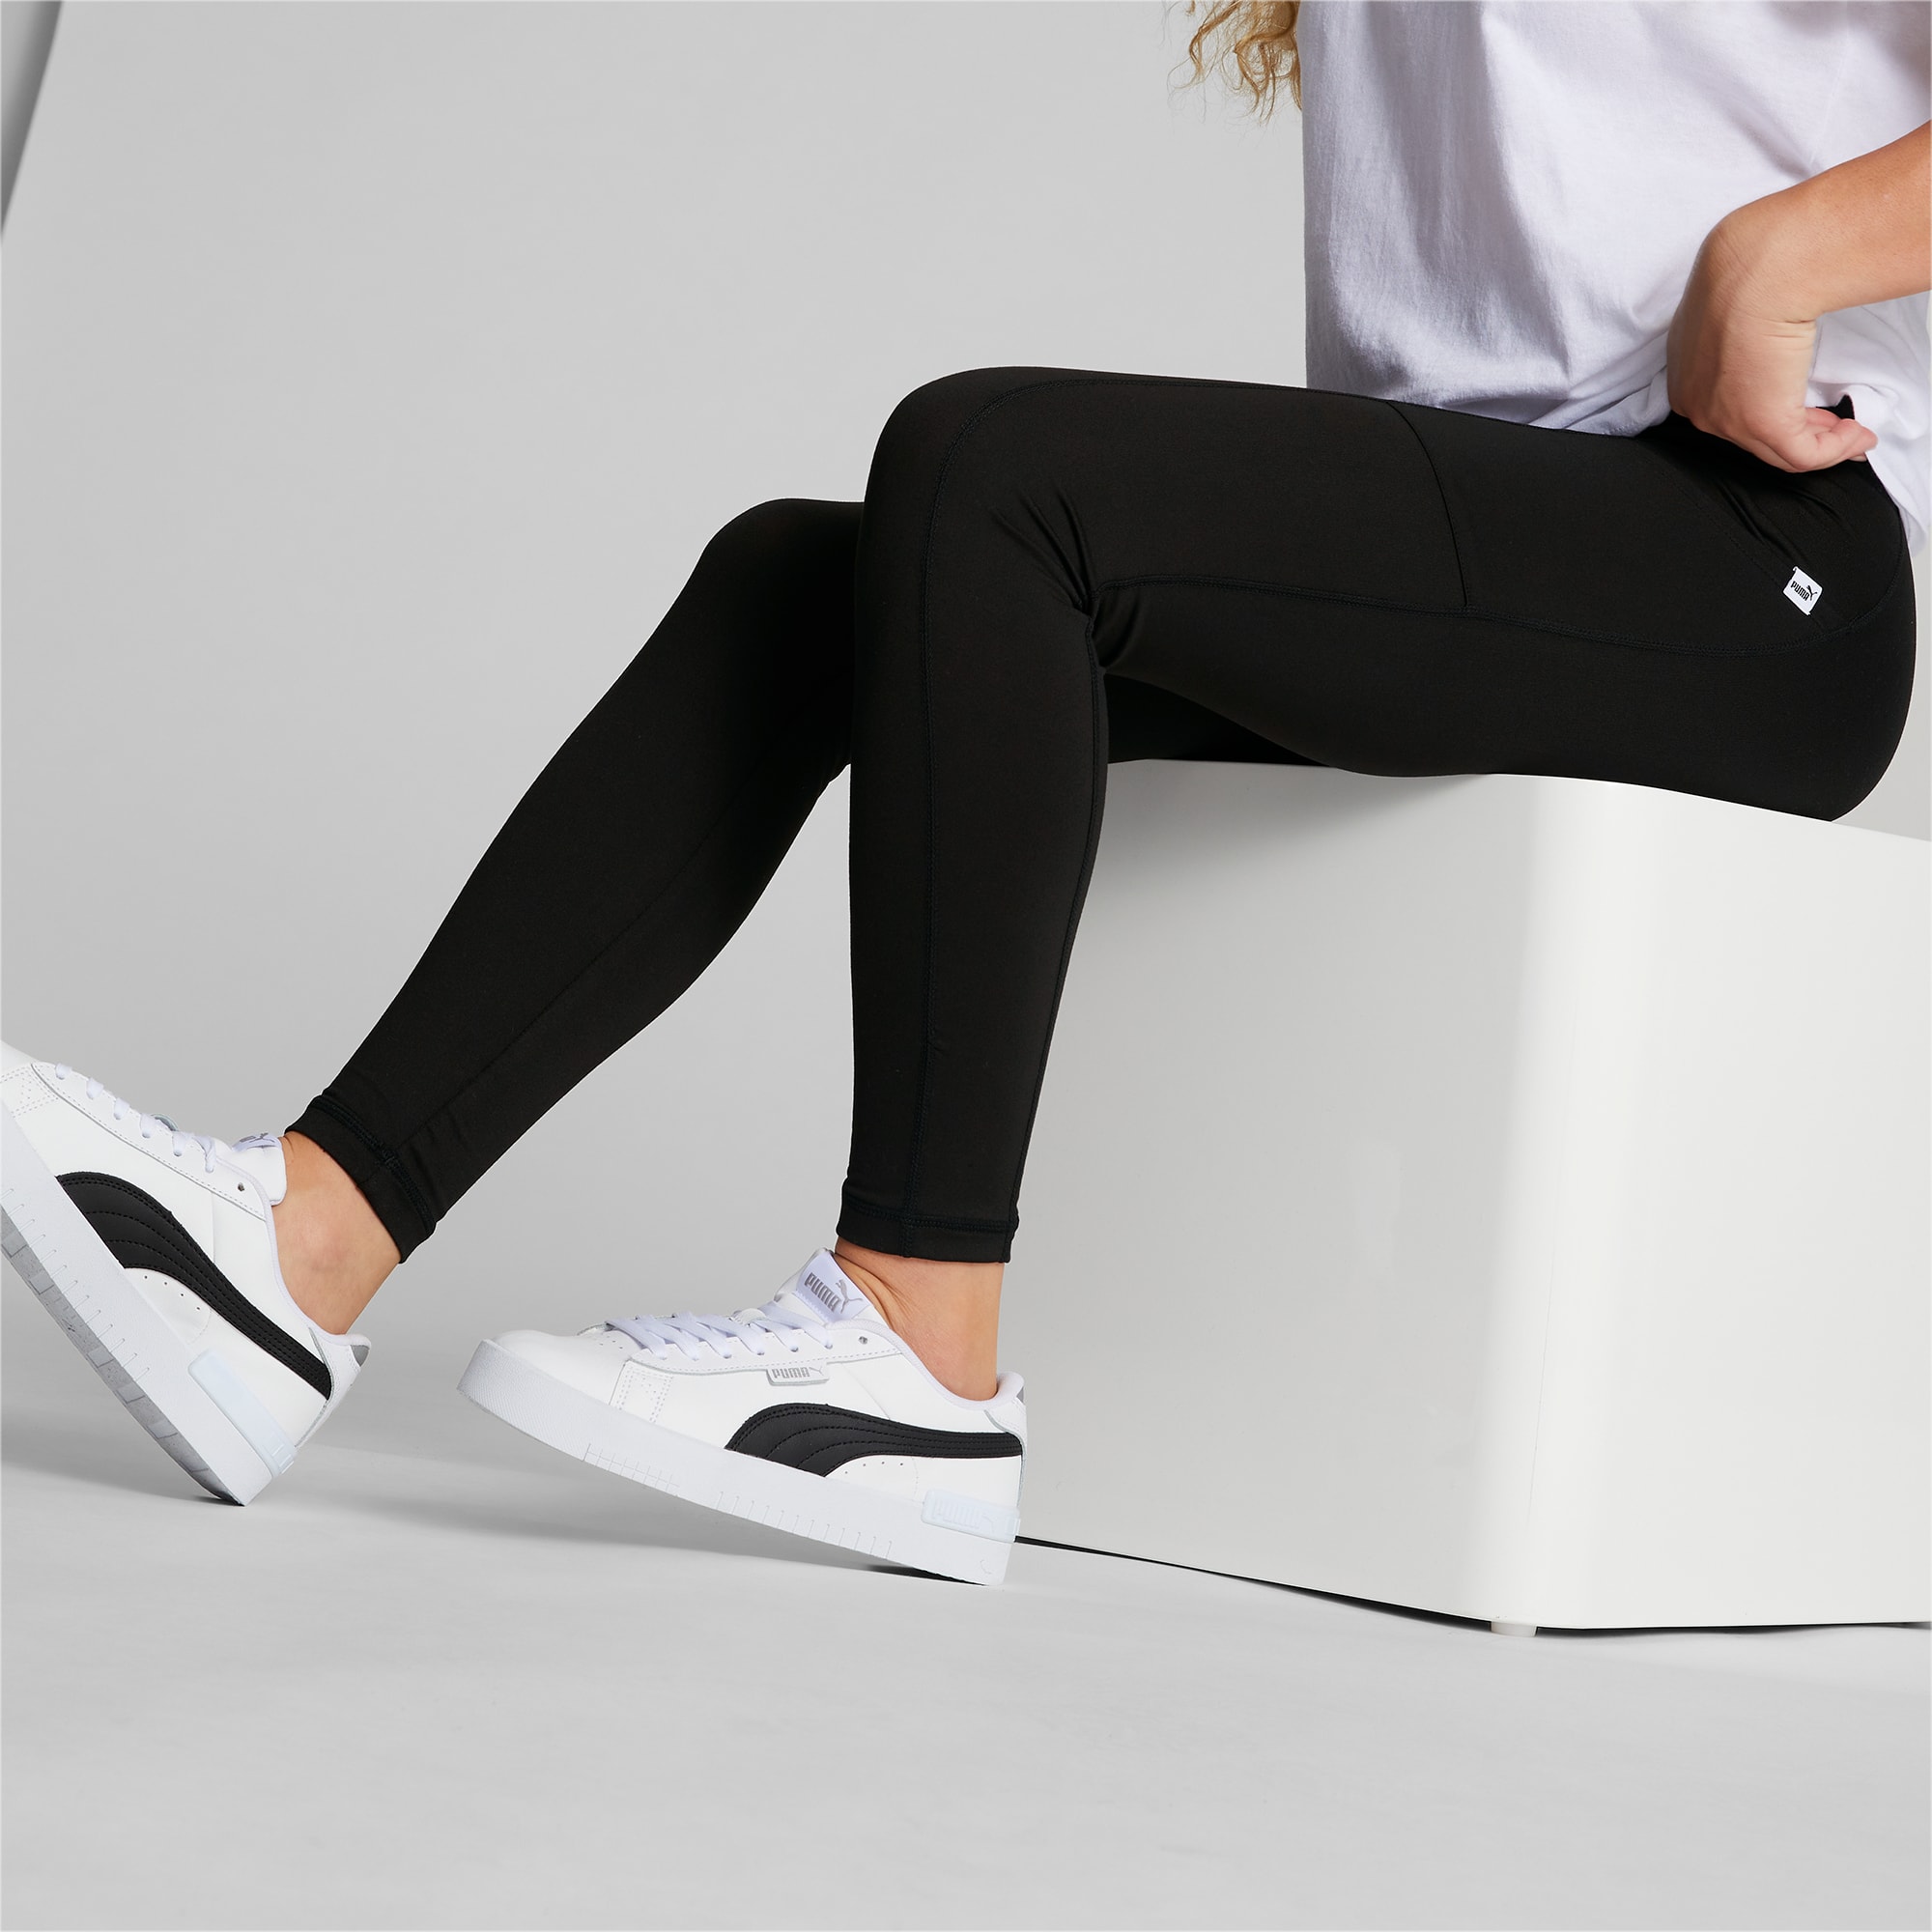 Performance Functional Tights by Puma